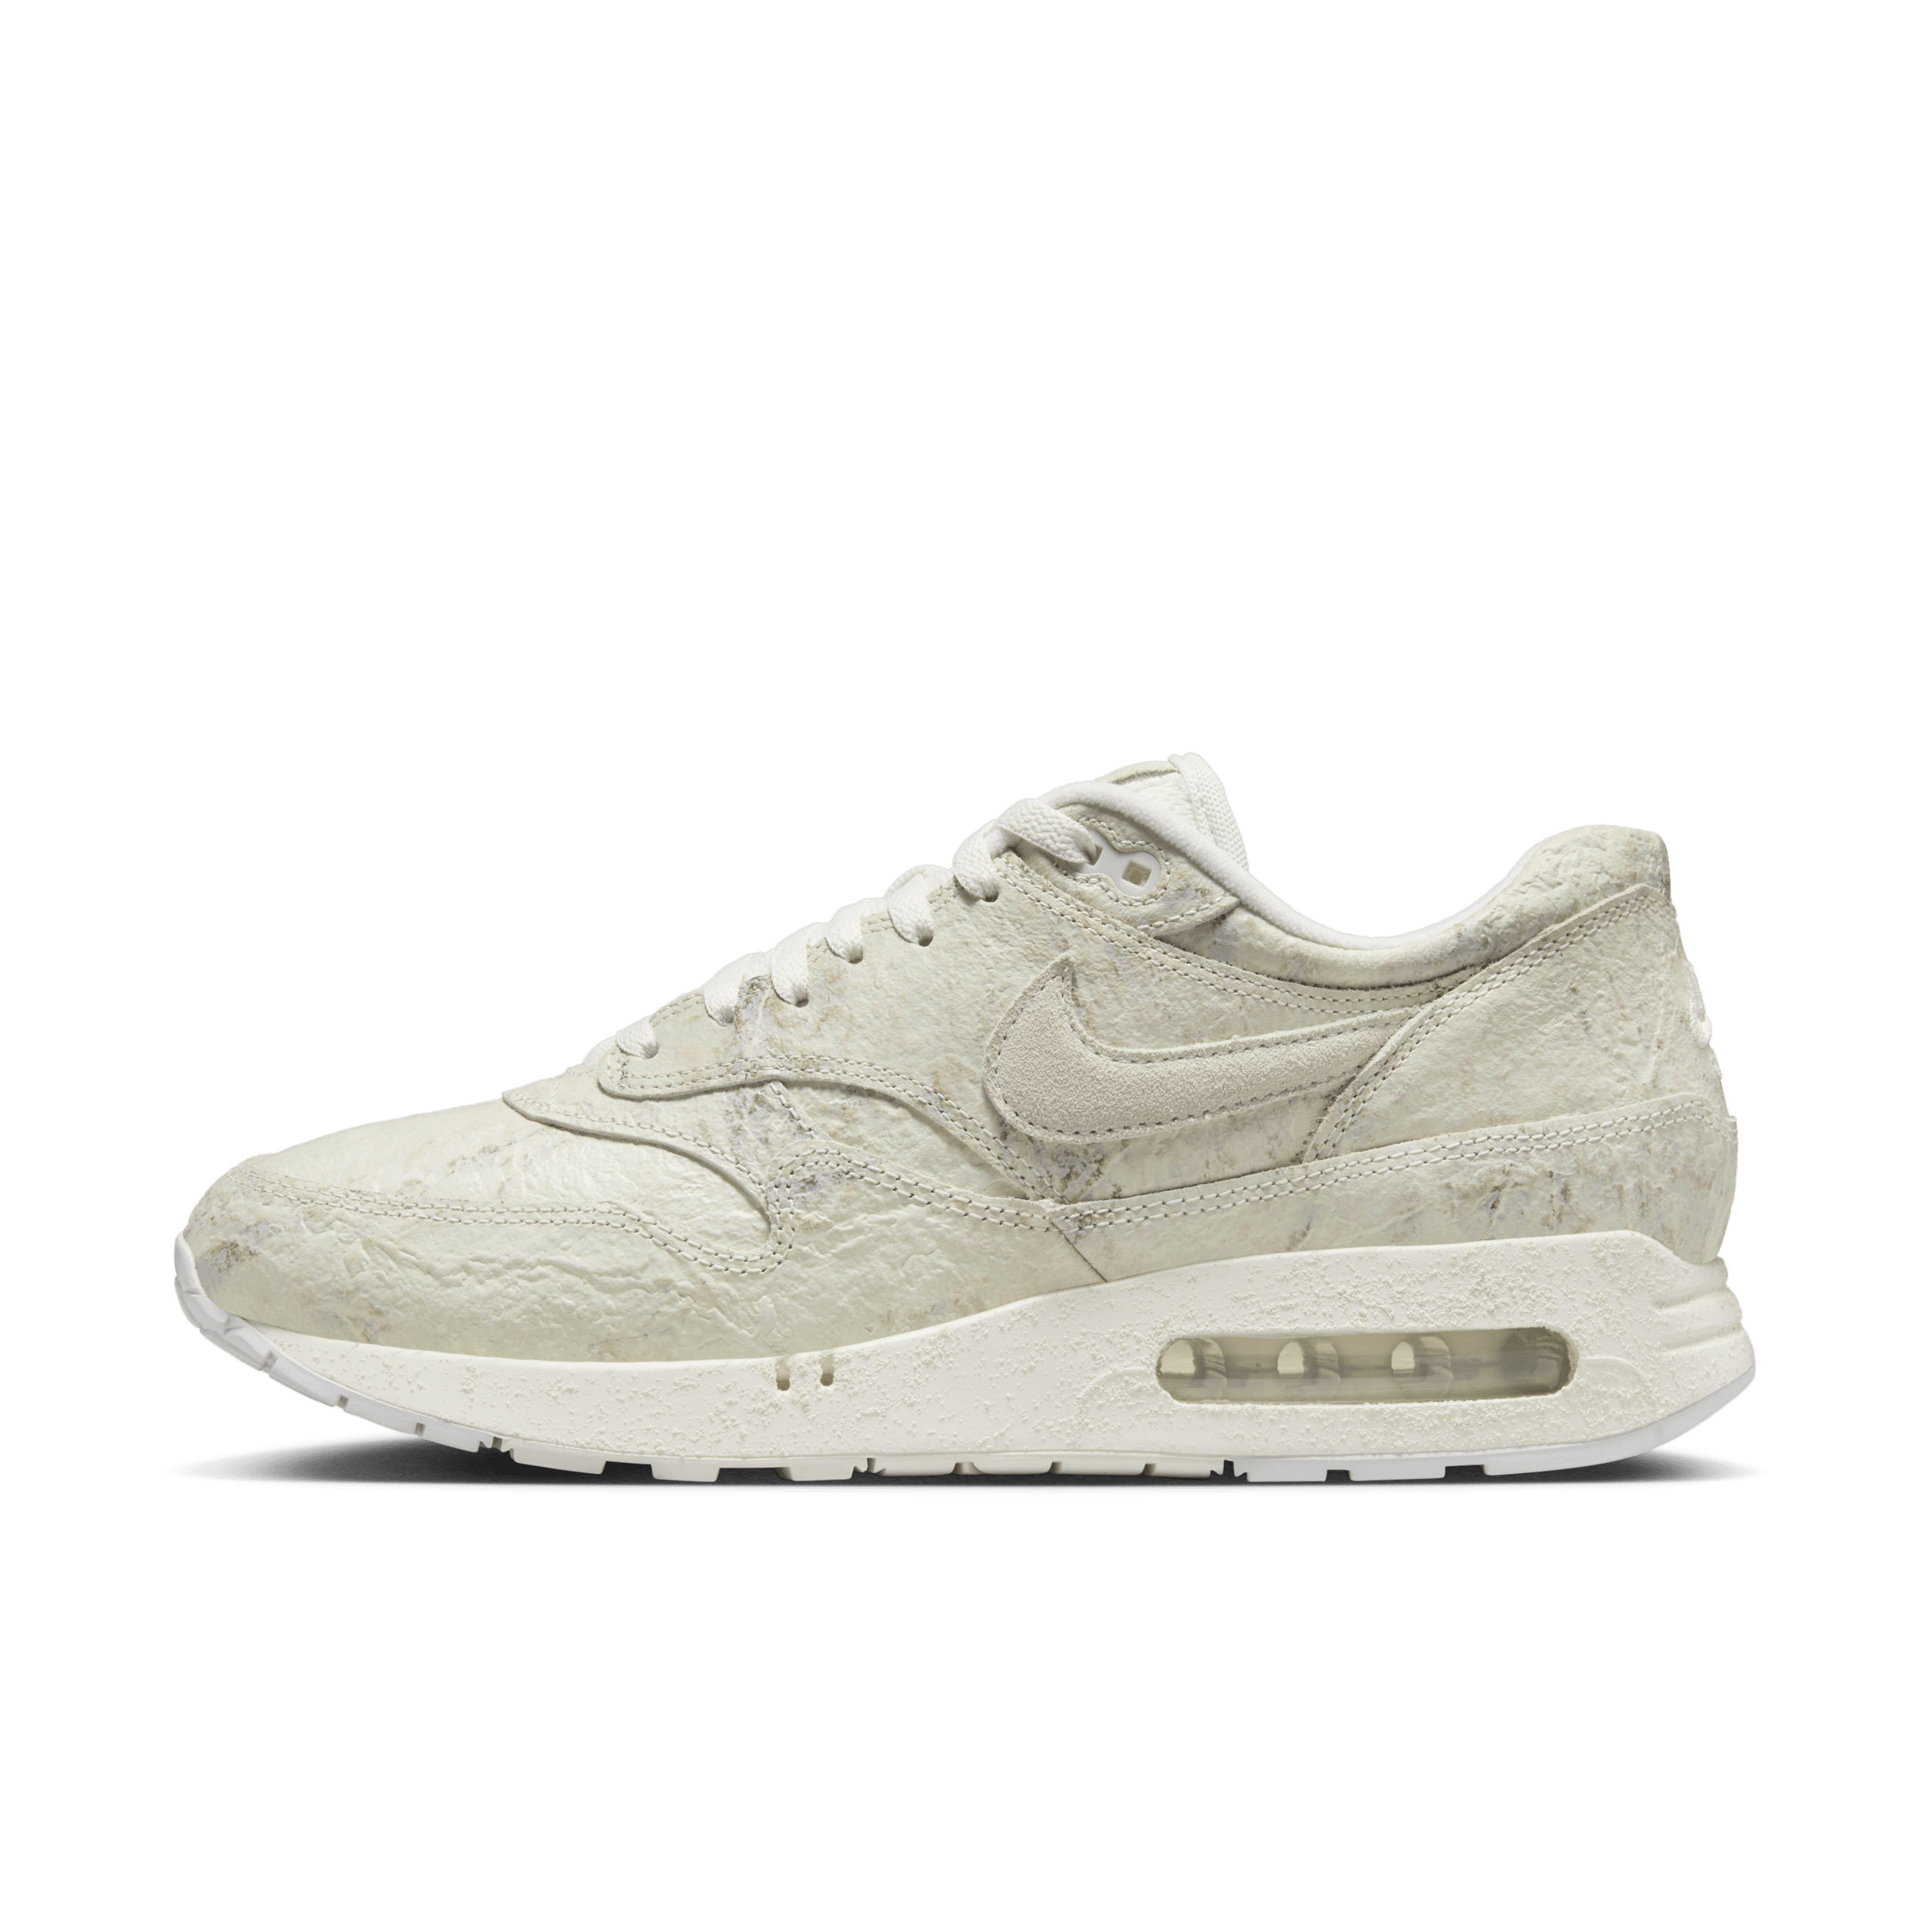 Chaussure Nike Air Max 1 '86 OG pour homme - Blanc